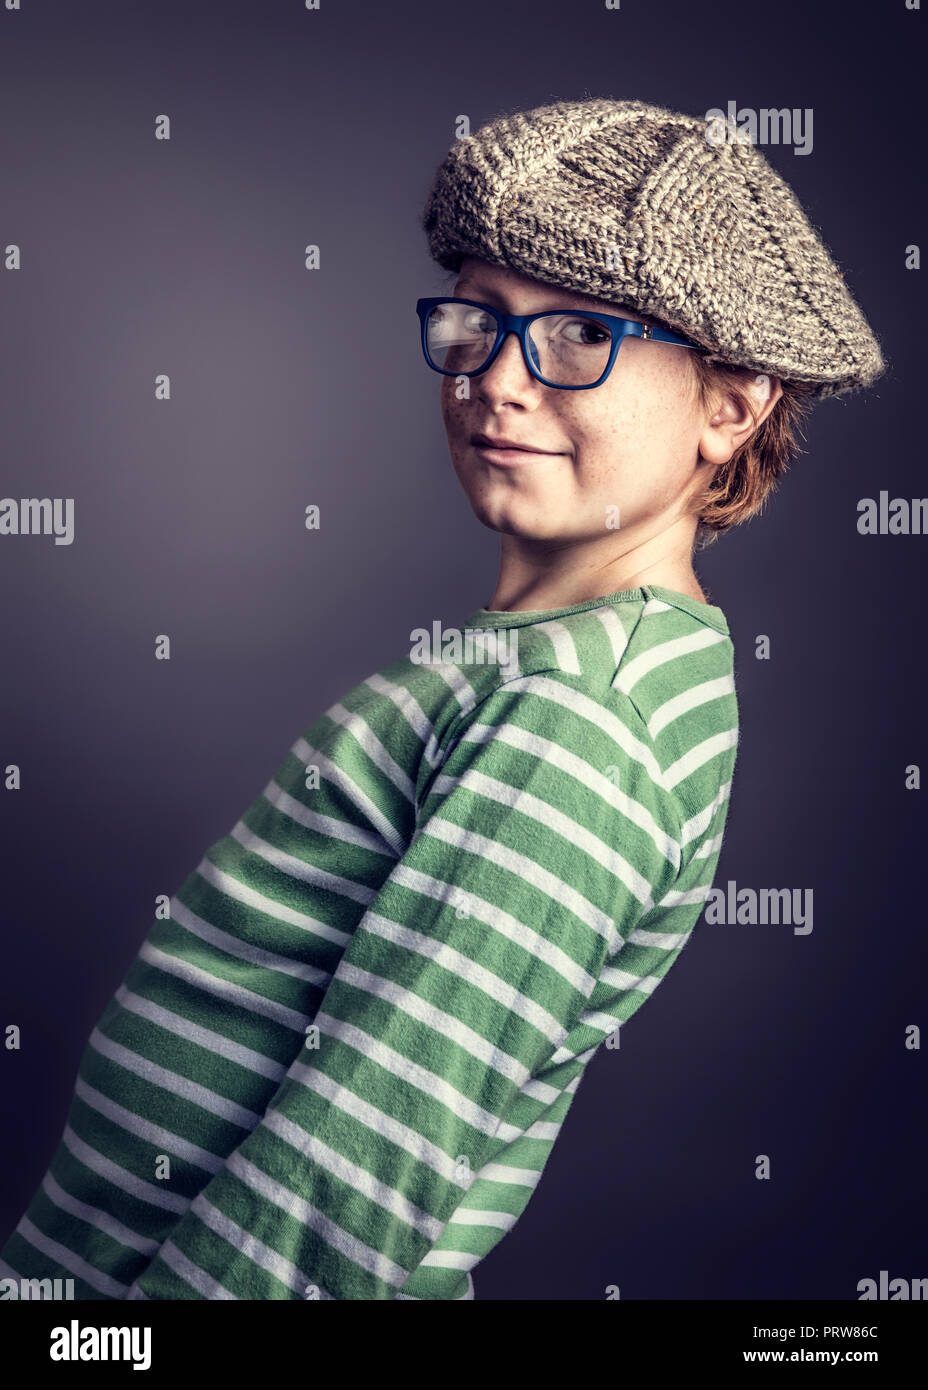 young boy with glasses and cap studio portrait Stock Photo